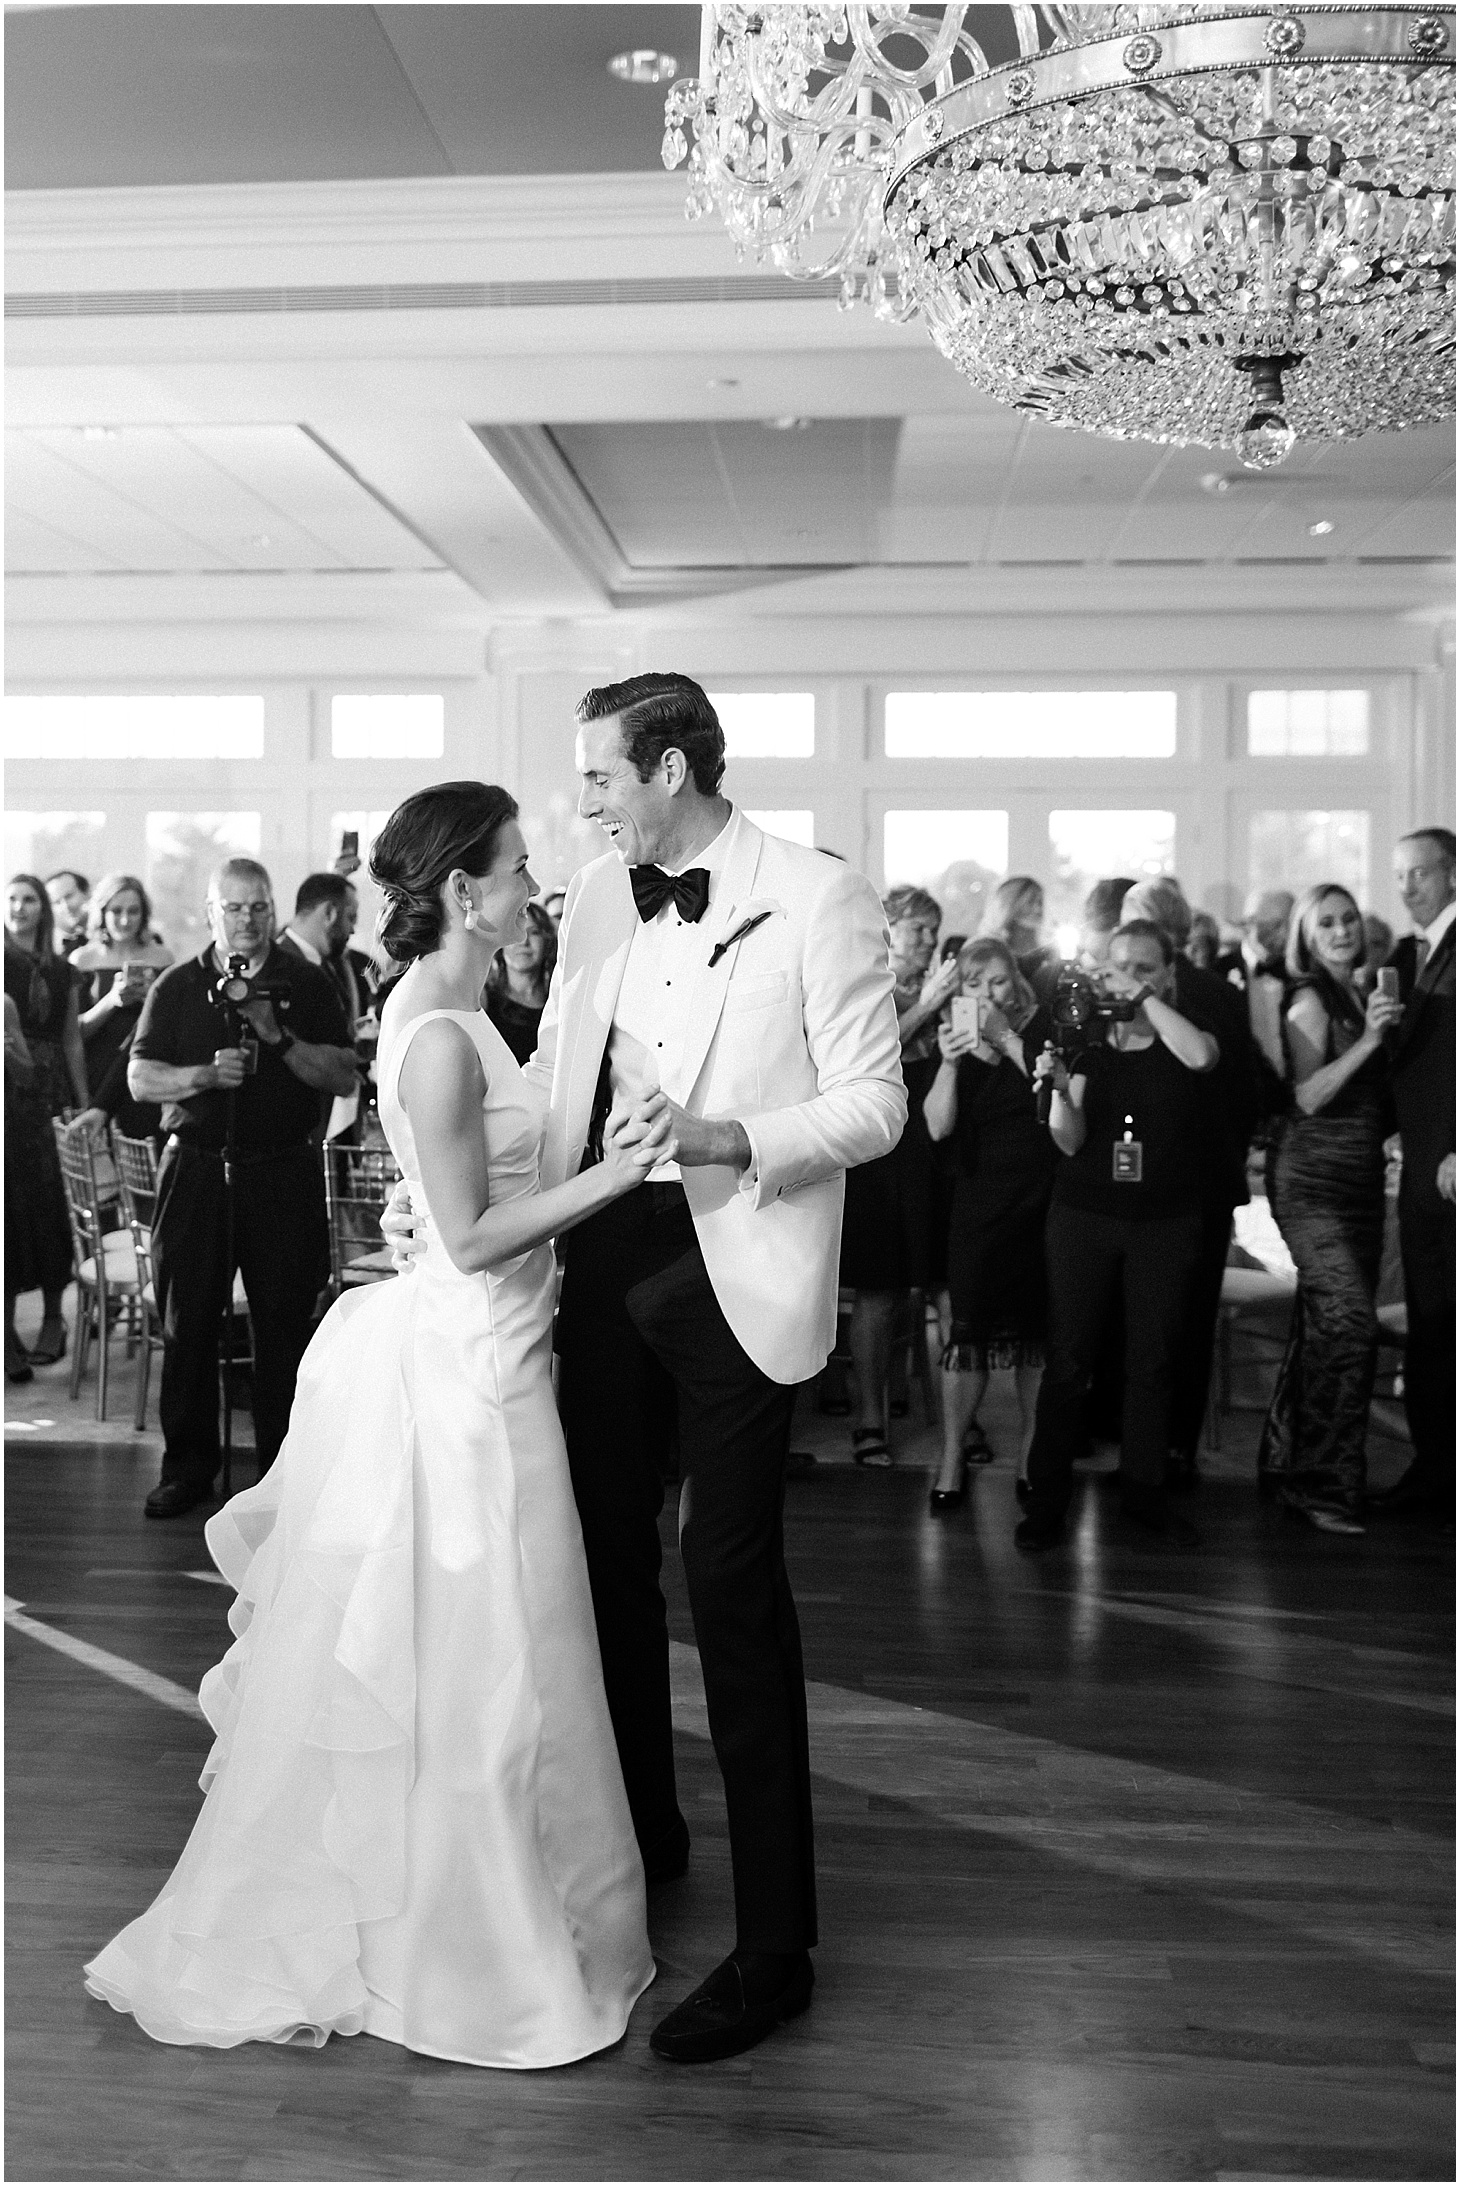 First Dance at Columbia Country Club | Wedding Ceremony at Cathedral of St. Matthew the Apostle | Classy October Wedding in Washington, D.C. | Sarah Bradshaw Photography